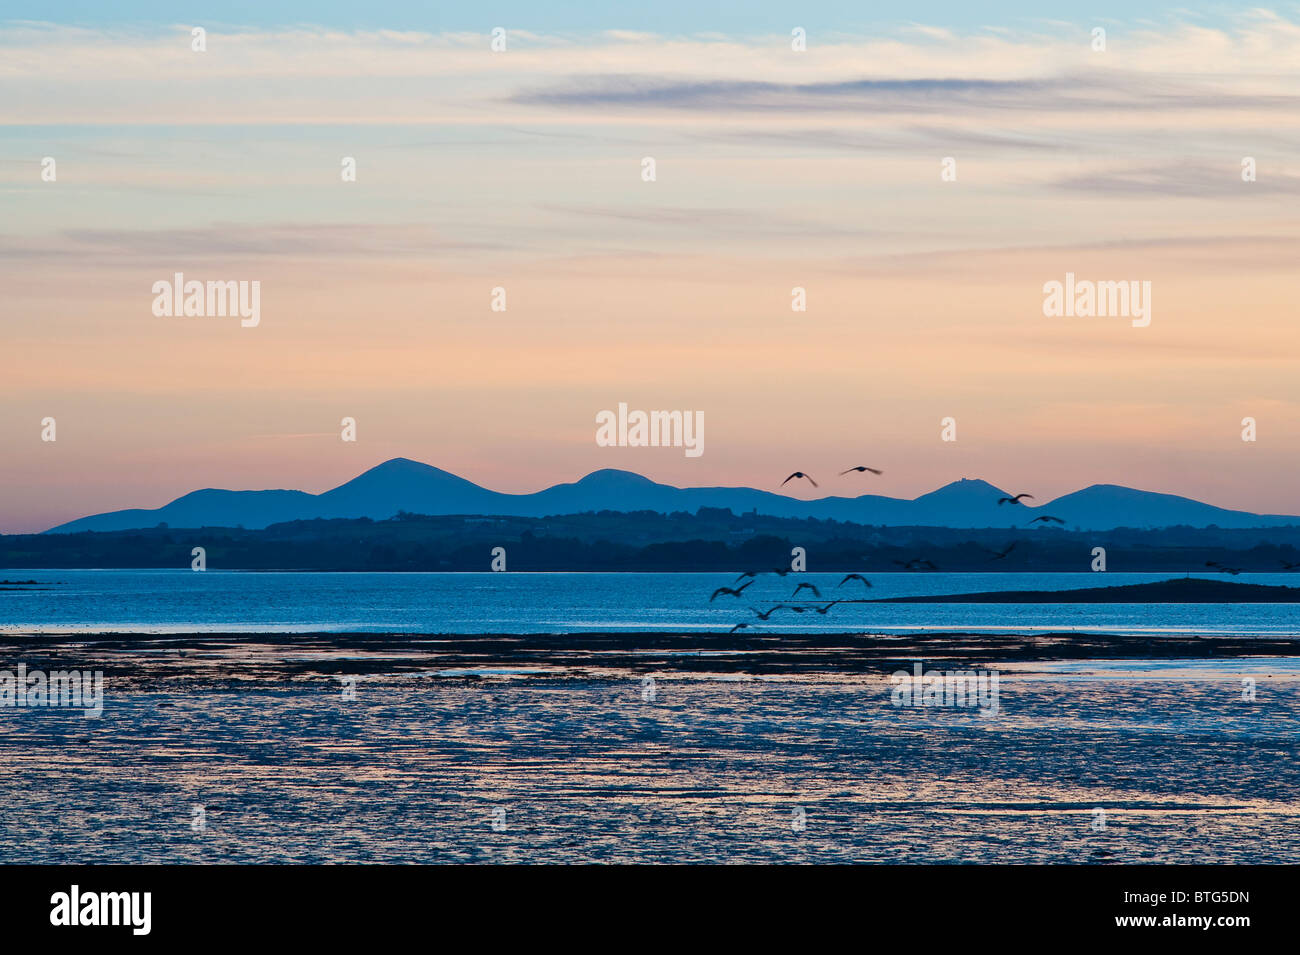 Canada geese fly towards the Mourne Mountains at sunset, seen from Mount Stewart on the Ards Peninsula across Strangford Lough, Northern Ireland Stock Photo